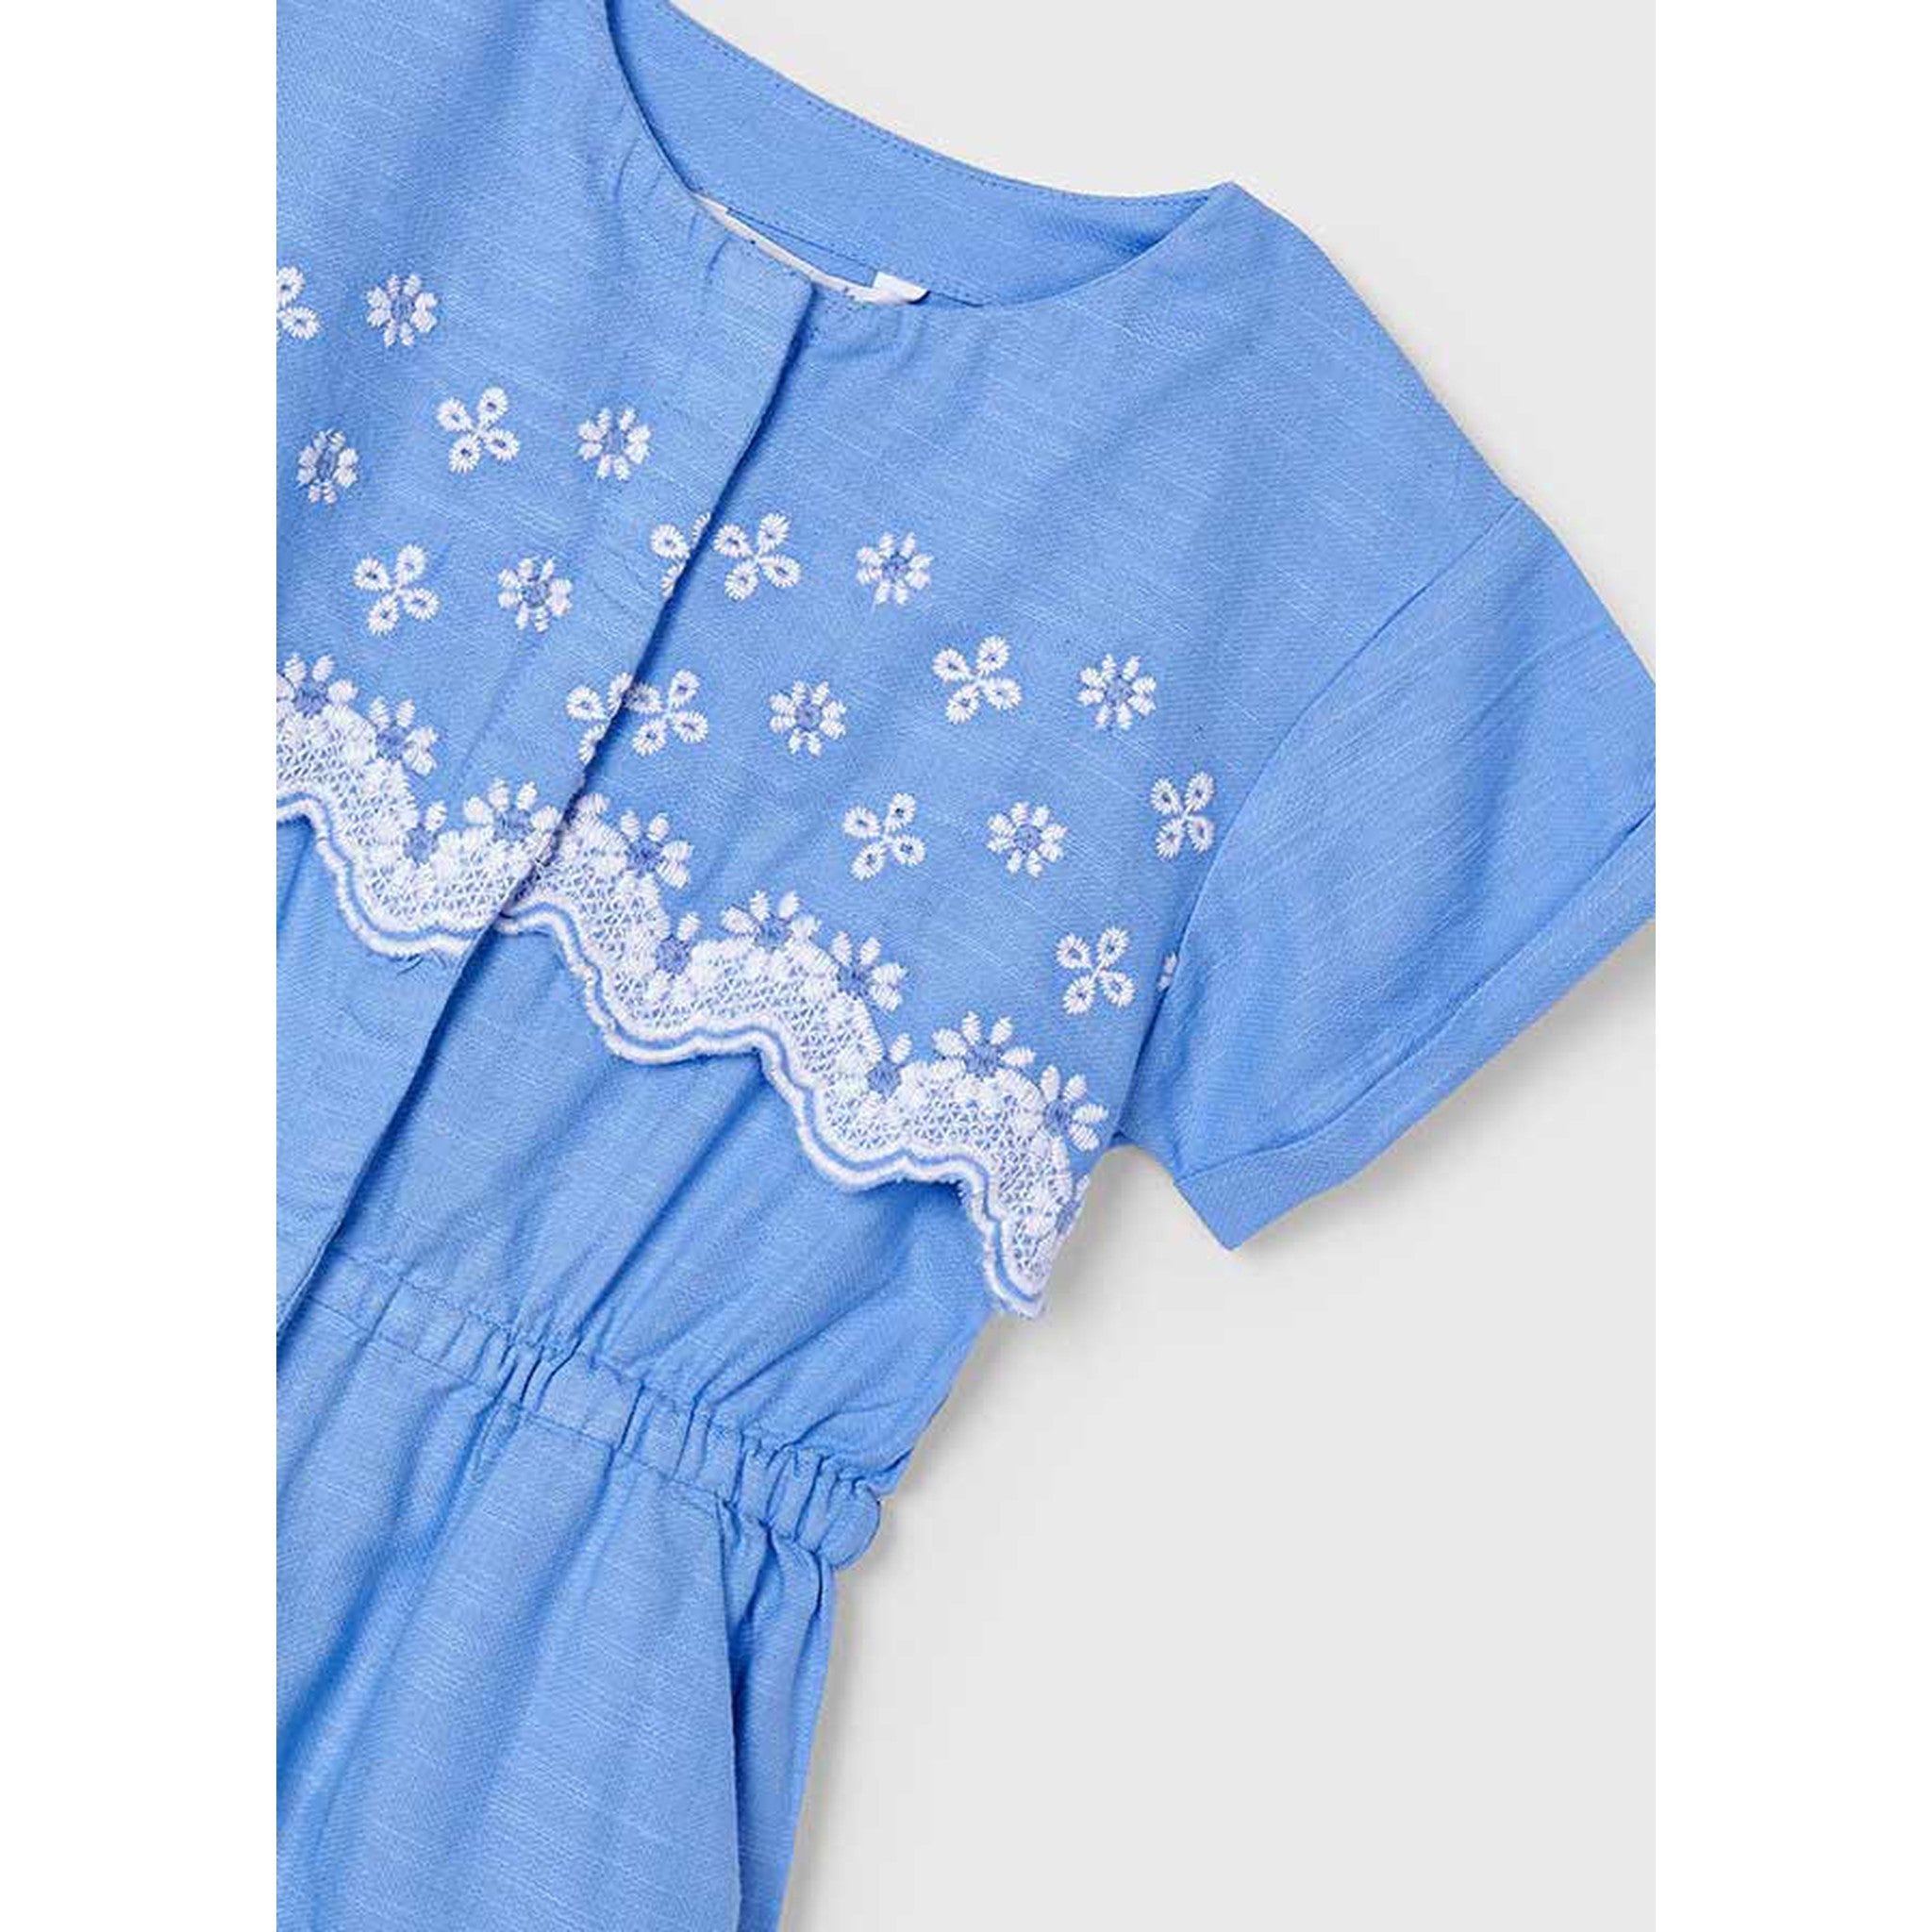 Girls embroidered romper